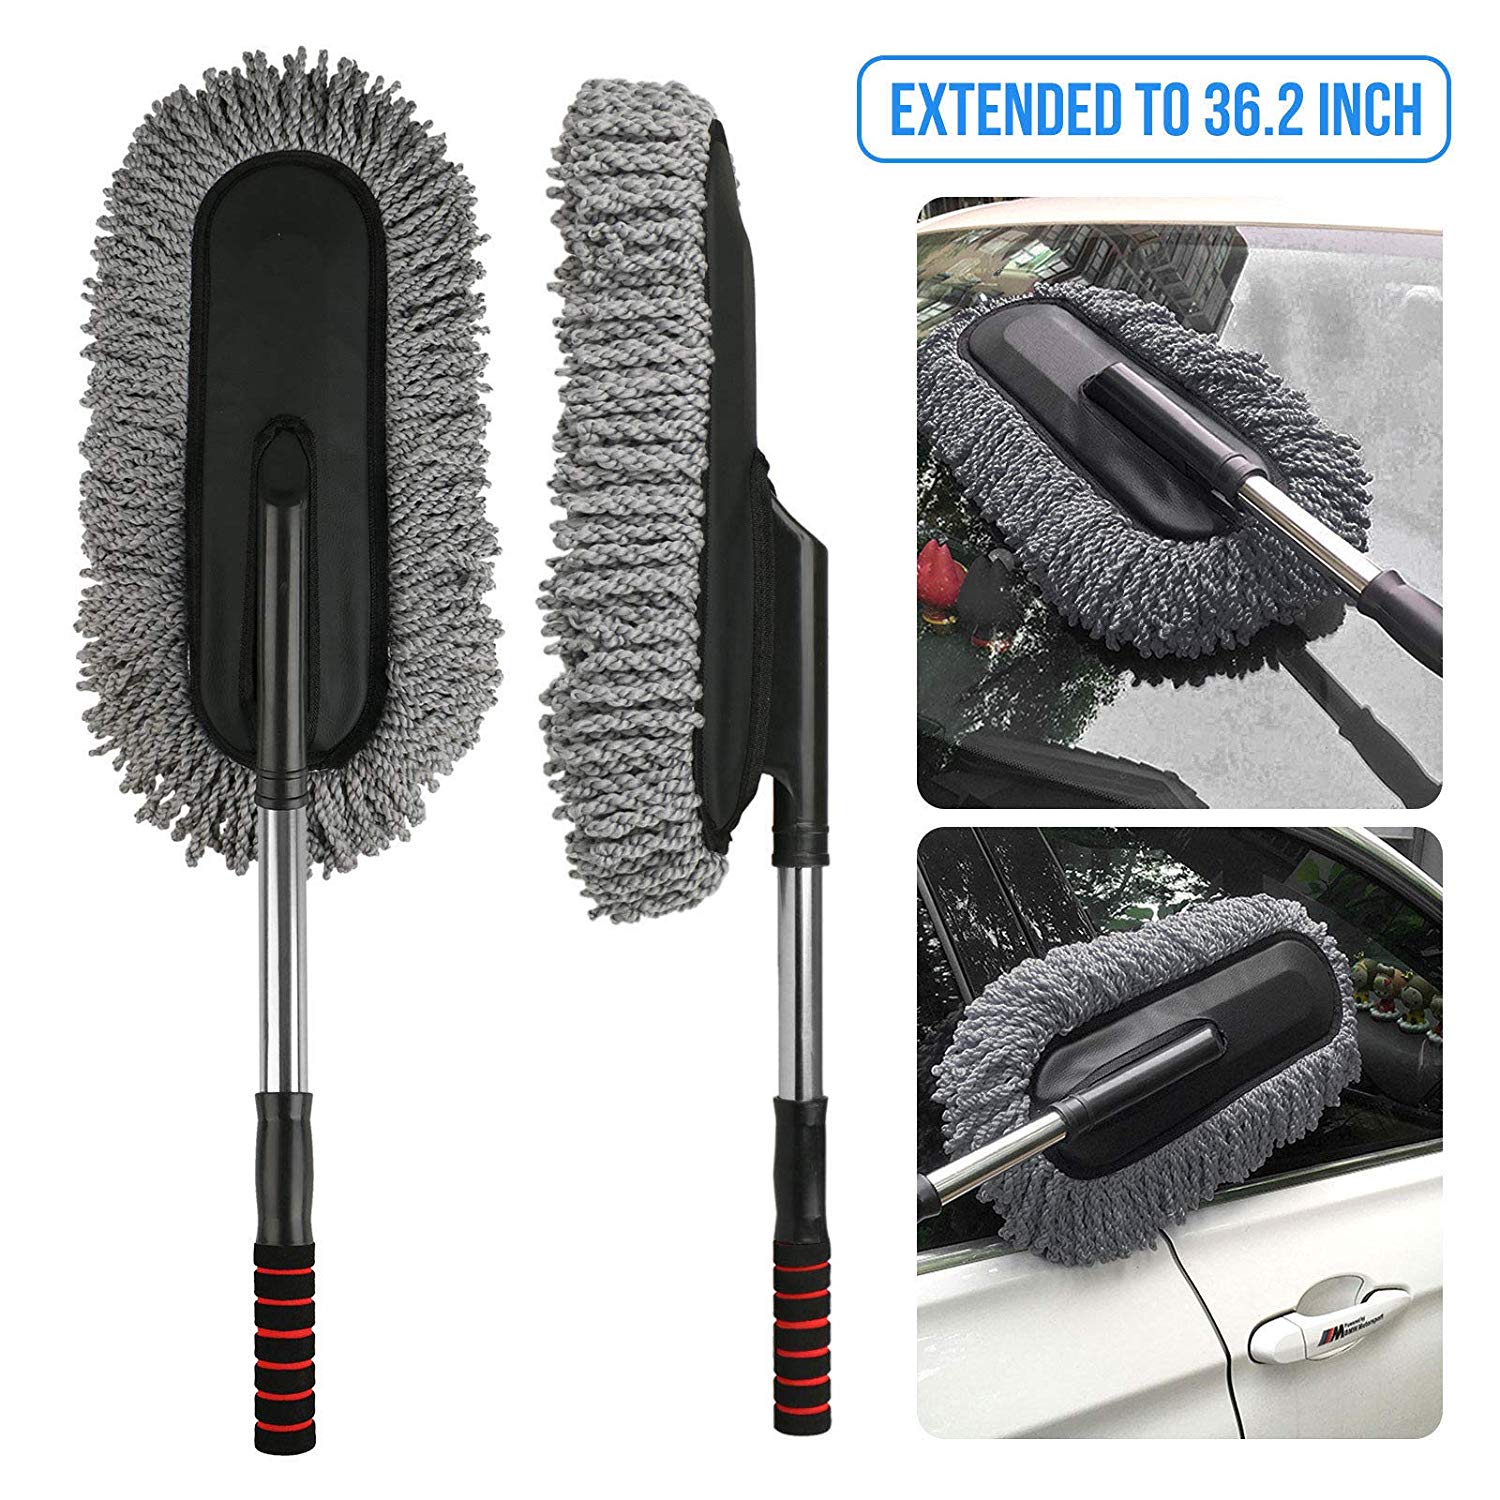 Motorcycle Cleaning Clean Brush Kit Set Stiff Tire Detailing Chain Brush  Microfiber Drying Towel Large Sponge Dirt Dust Cleaning